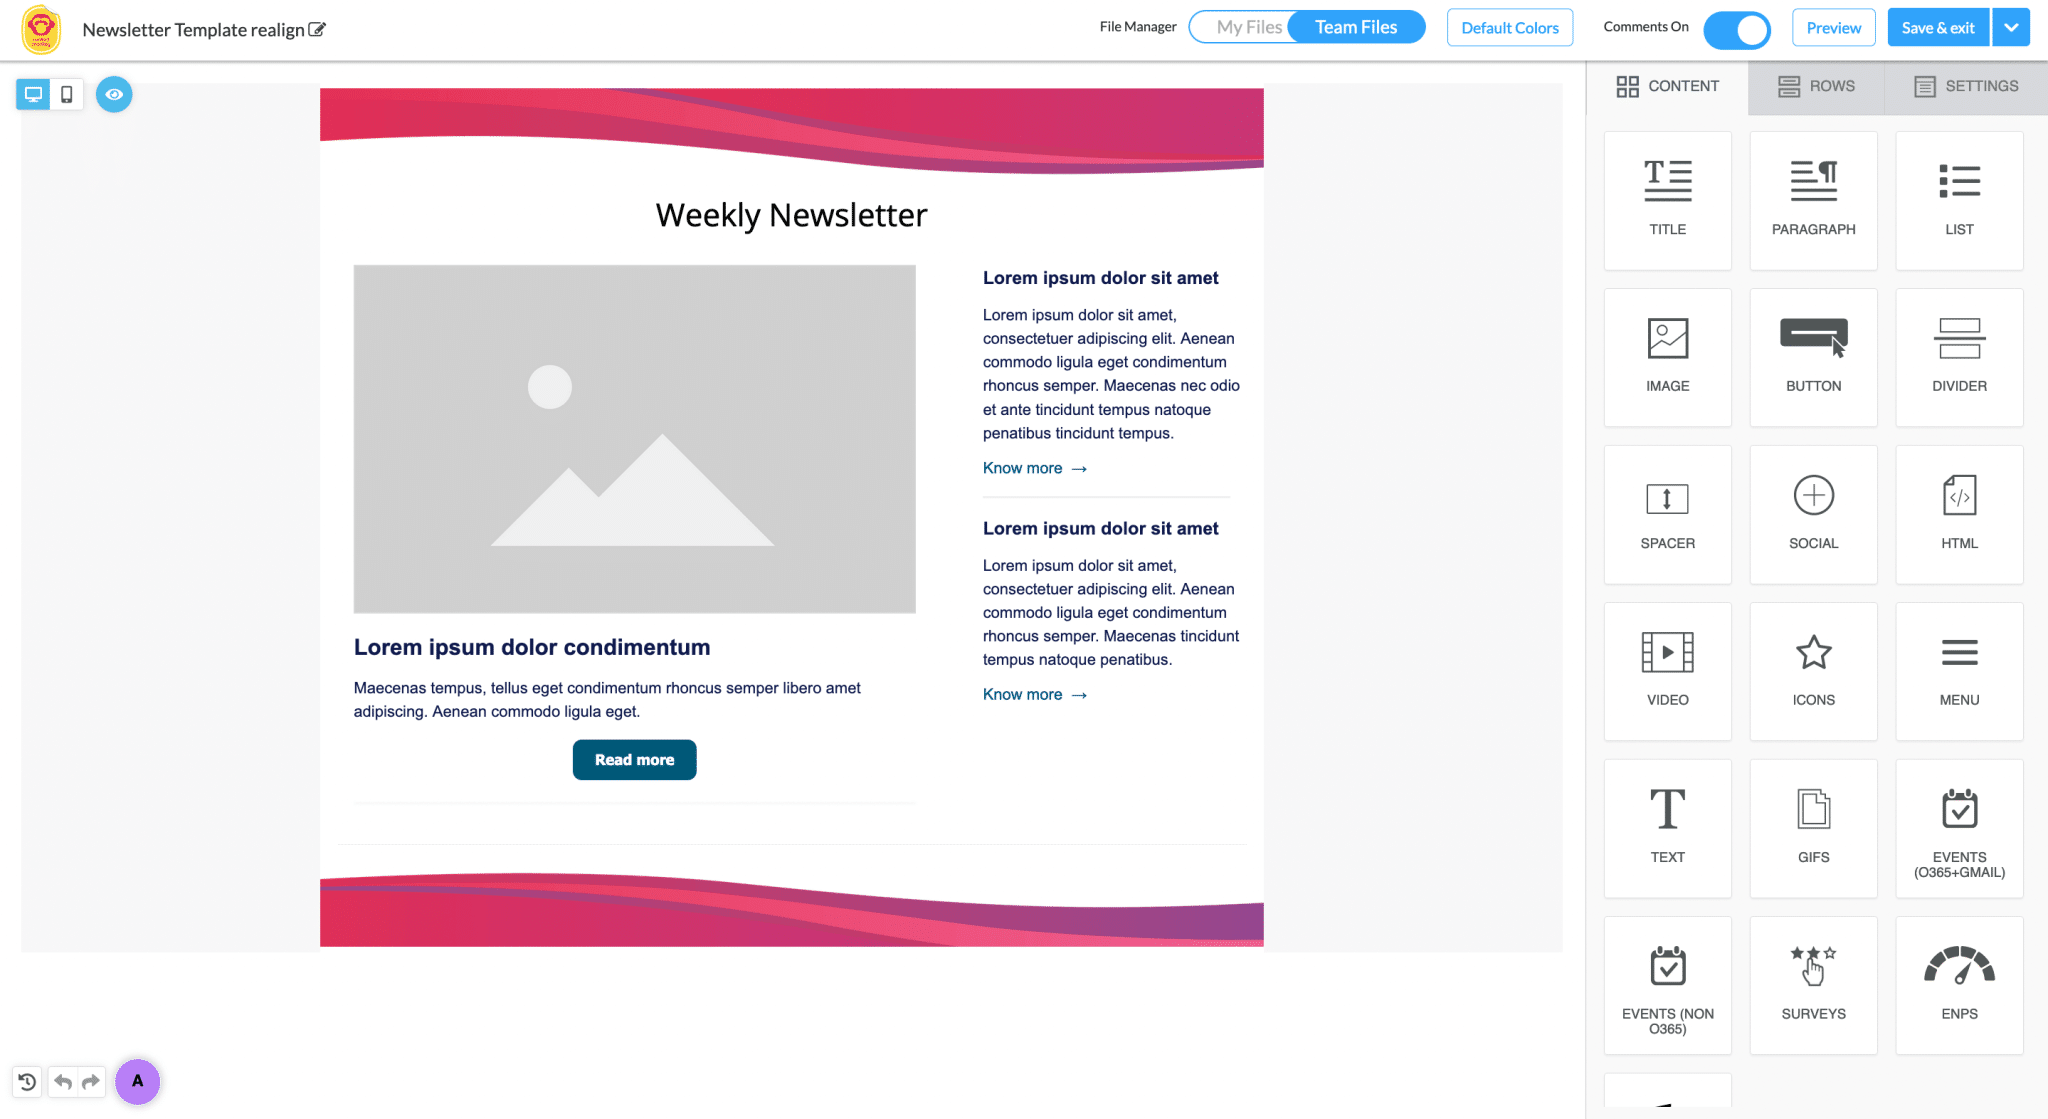 Screenshot of weekly newsletter within ContactMonkey's email template builder.